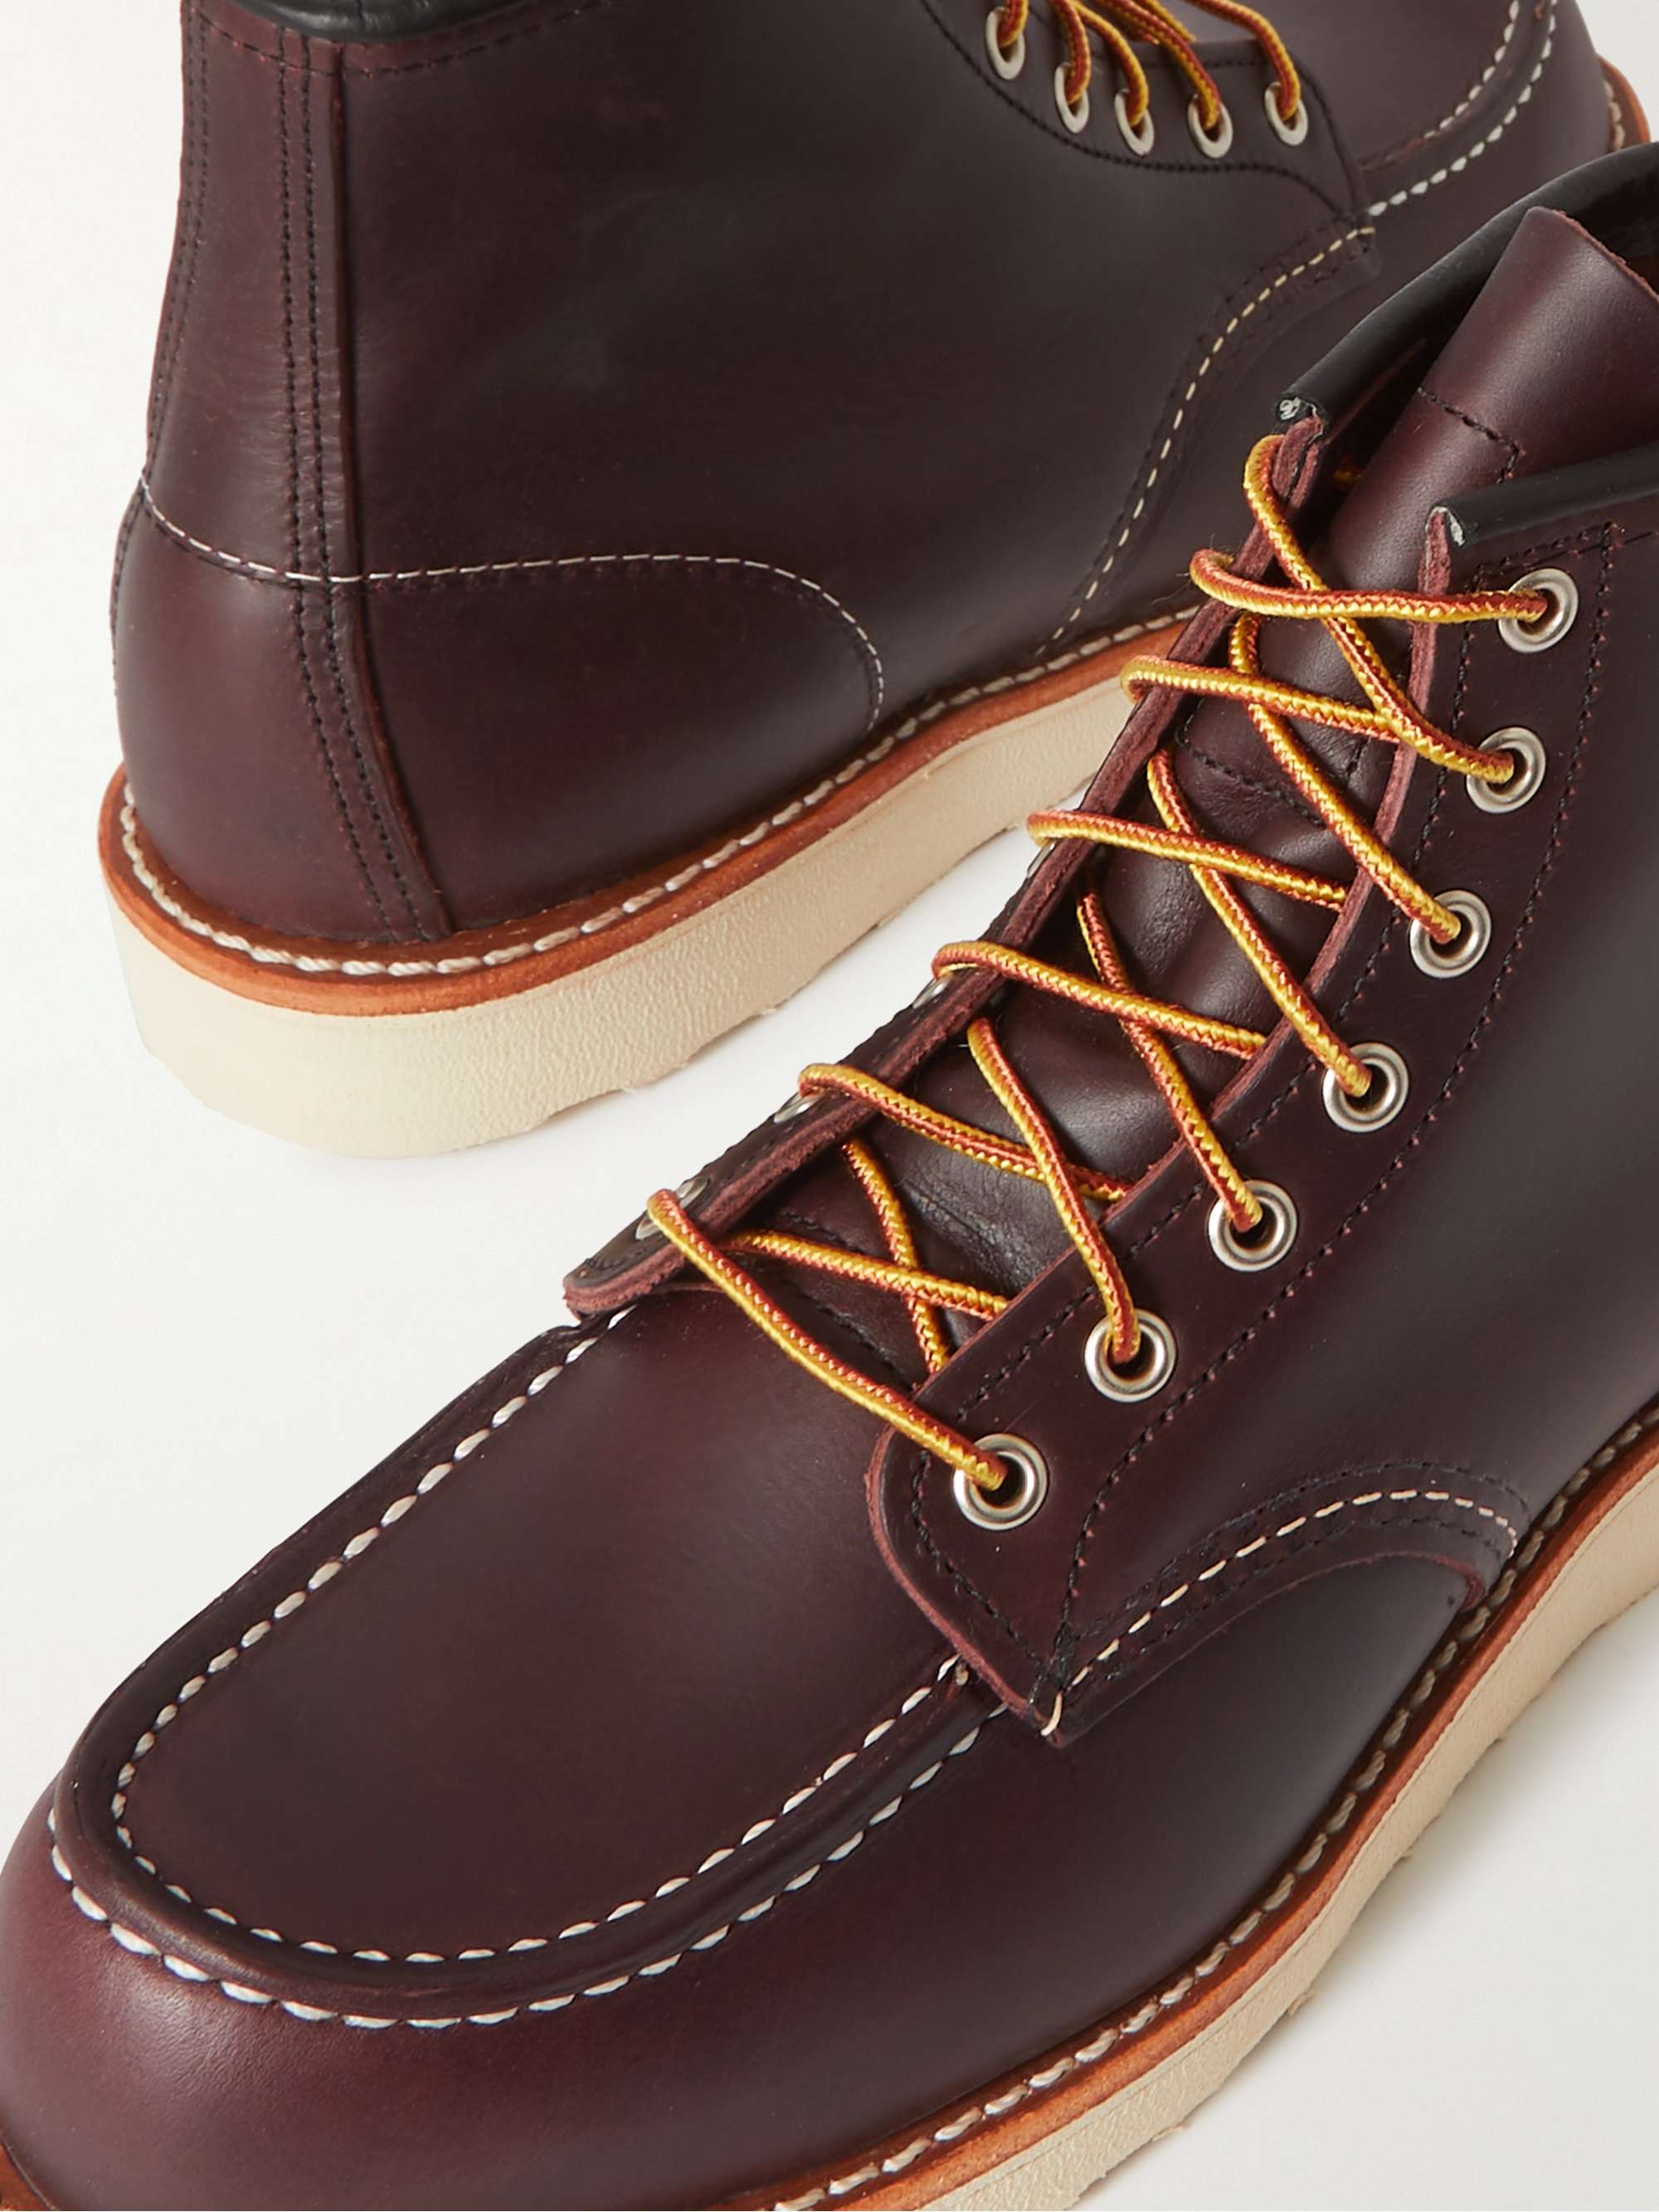 RED WING SHOES Classic Moc Leather Boots